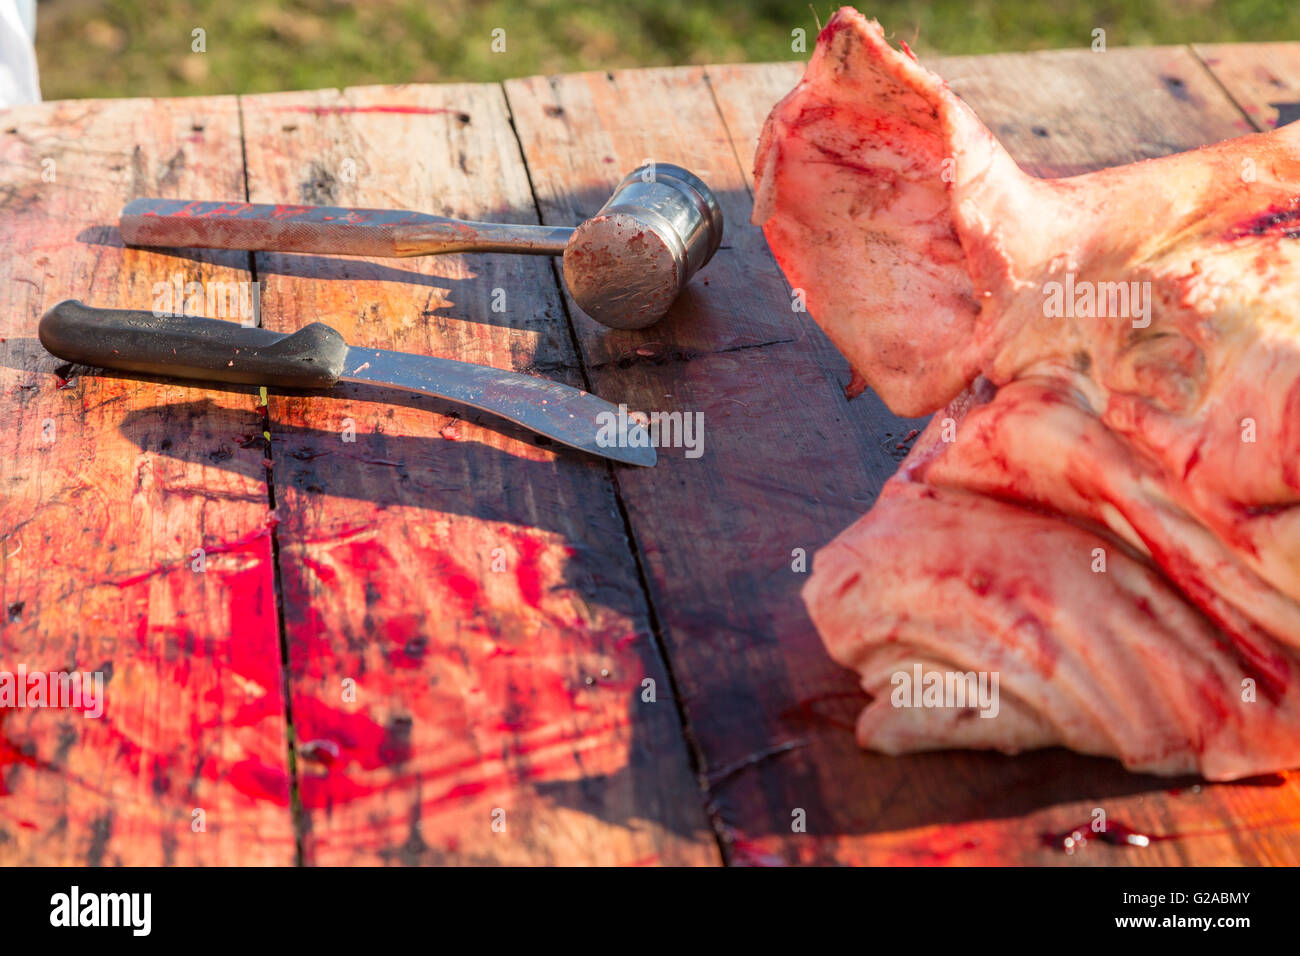 A bloody hatchet and knife sits on the butchers table during a Cajun Boucherie, part of the traditional week long Mardi Gras festivities February 8, 2016 in Eunice, Louisiana. The old fashion community event involves slaughtering a whole hog and using and cooking all parts for the guests. Stock Photo